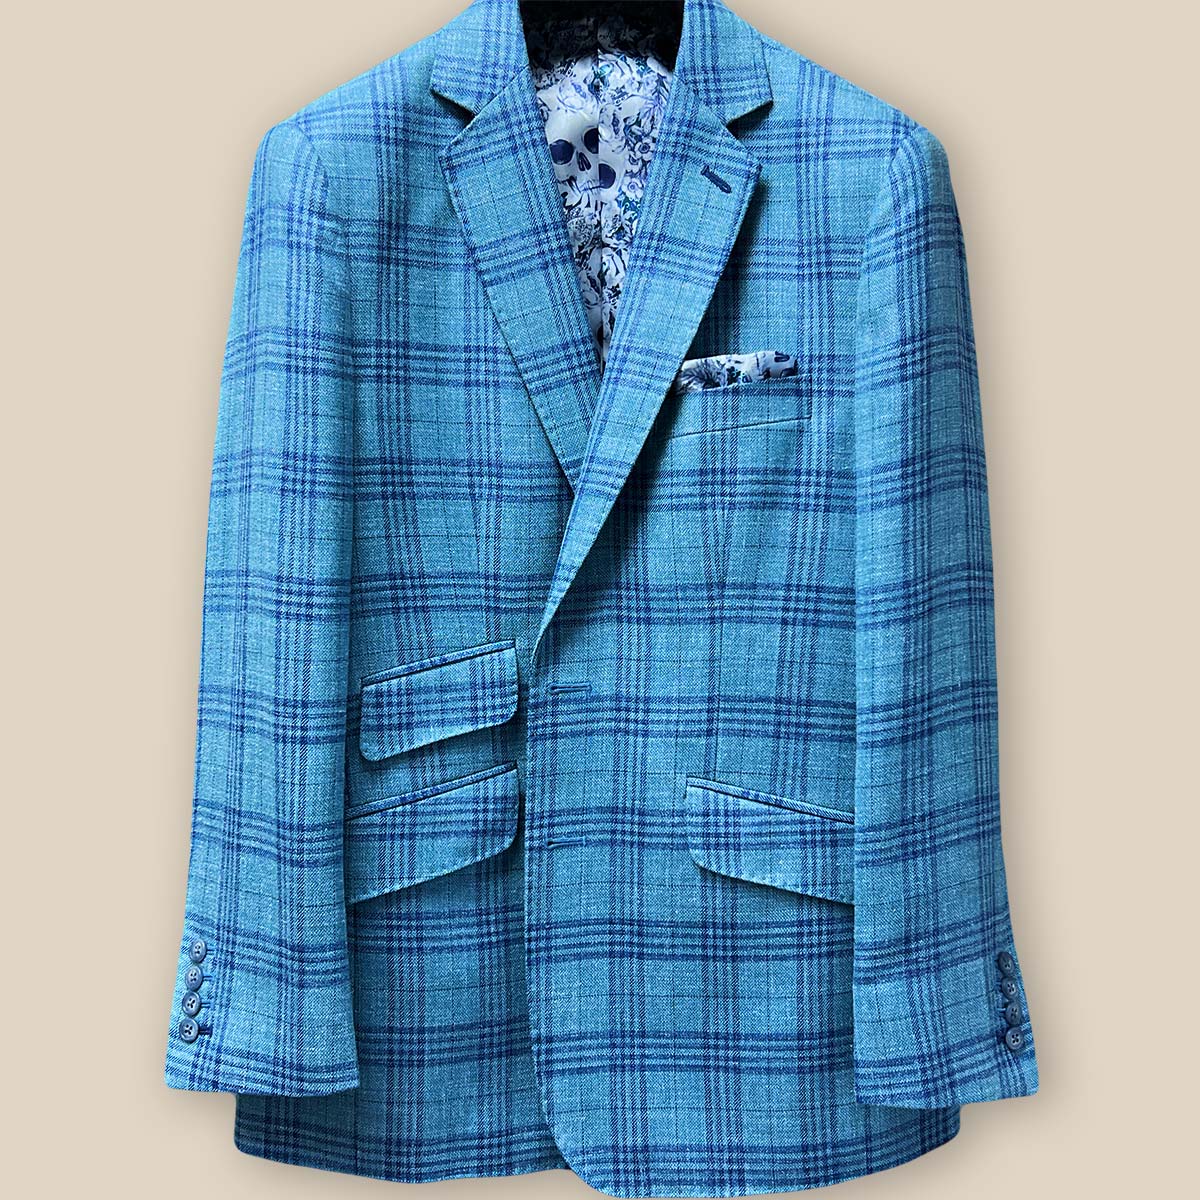 Close-up of the green with blue plaid men's sportcoat's buttonhole panel, featuring dark blue accent stitching.